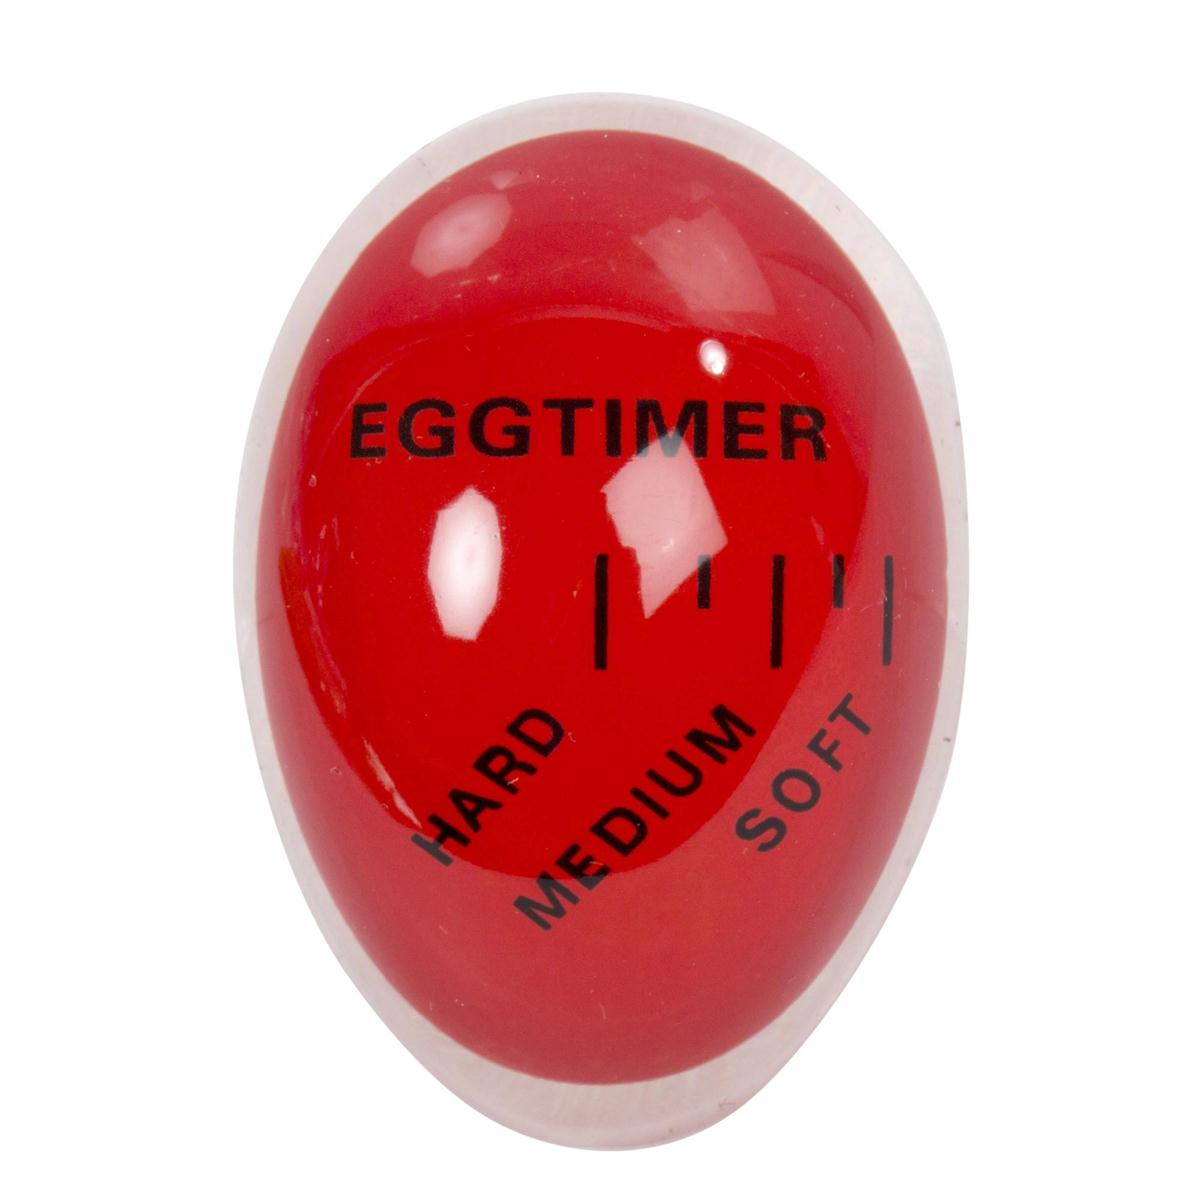 Luciano Colour Changing Egg Timer